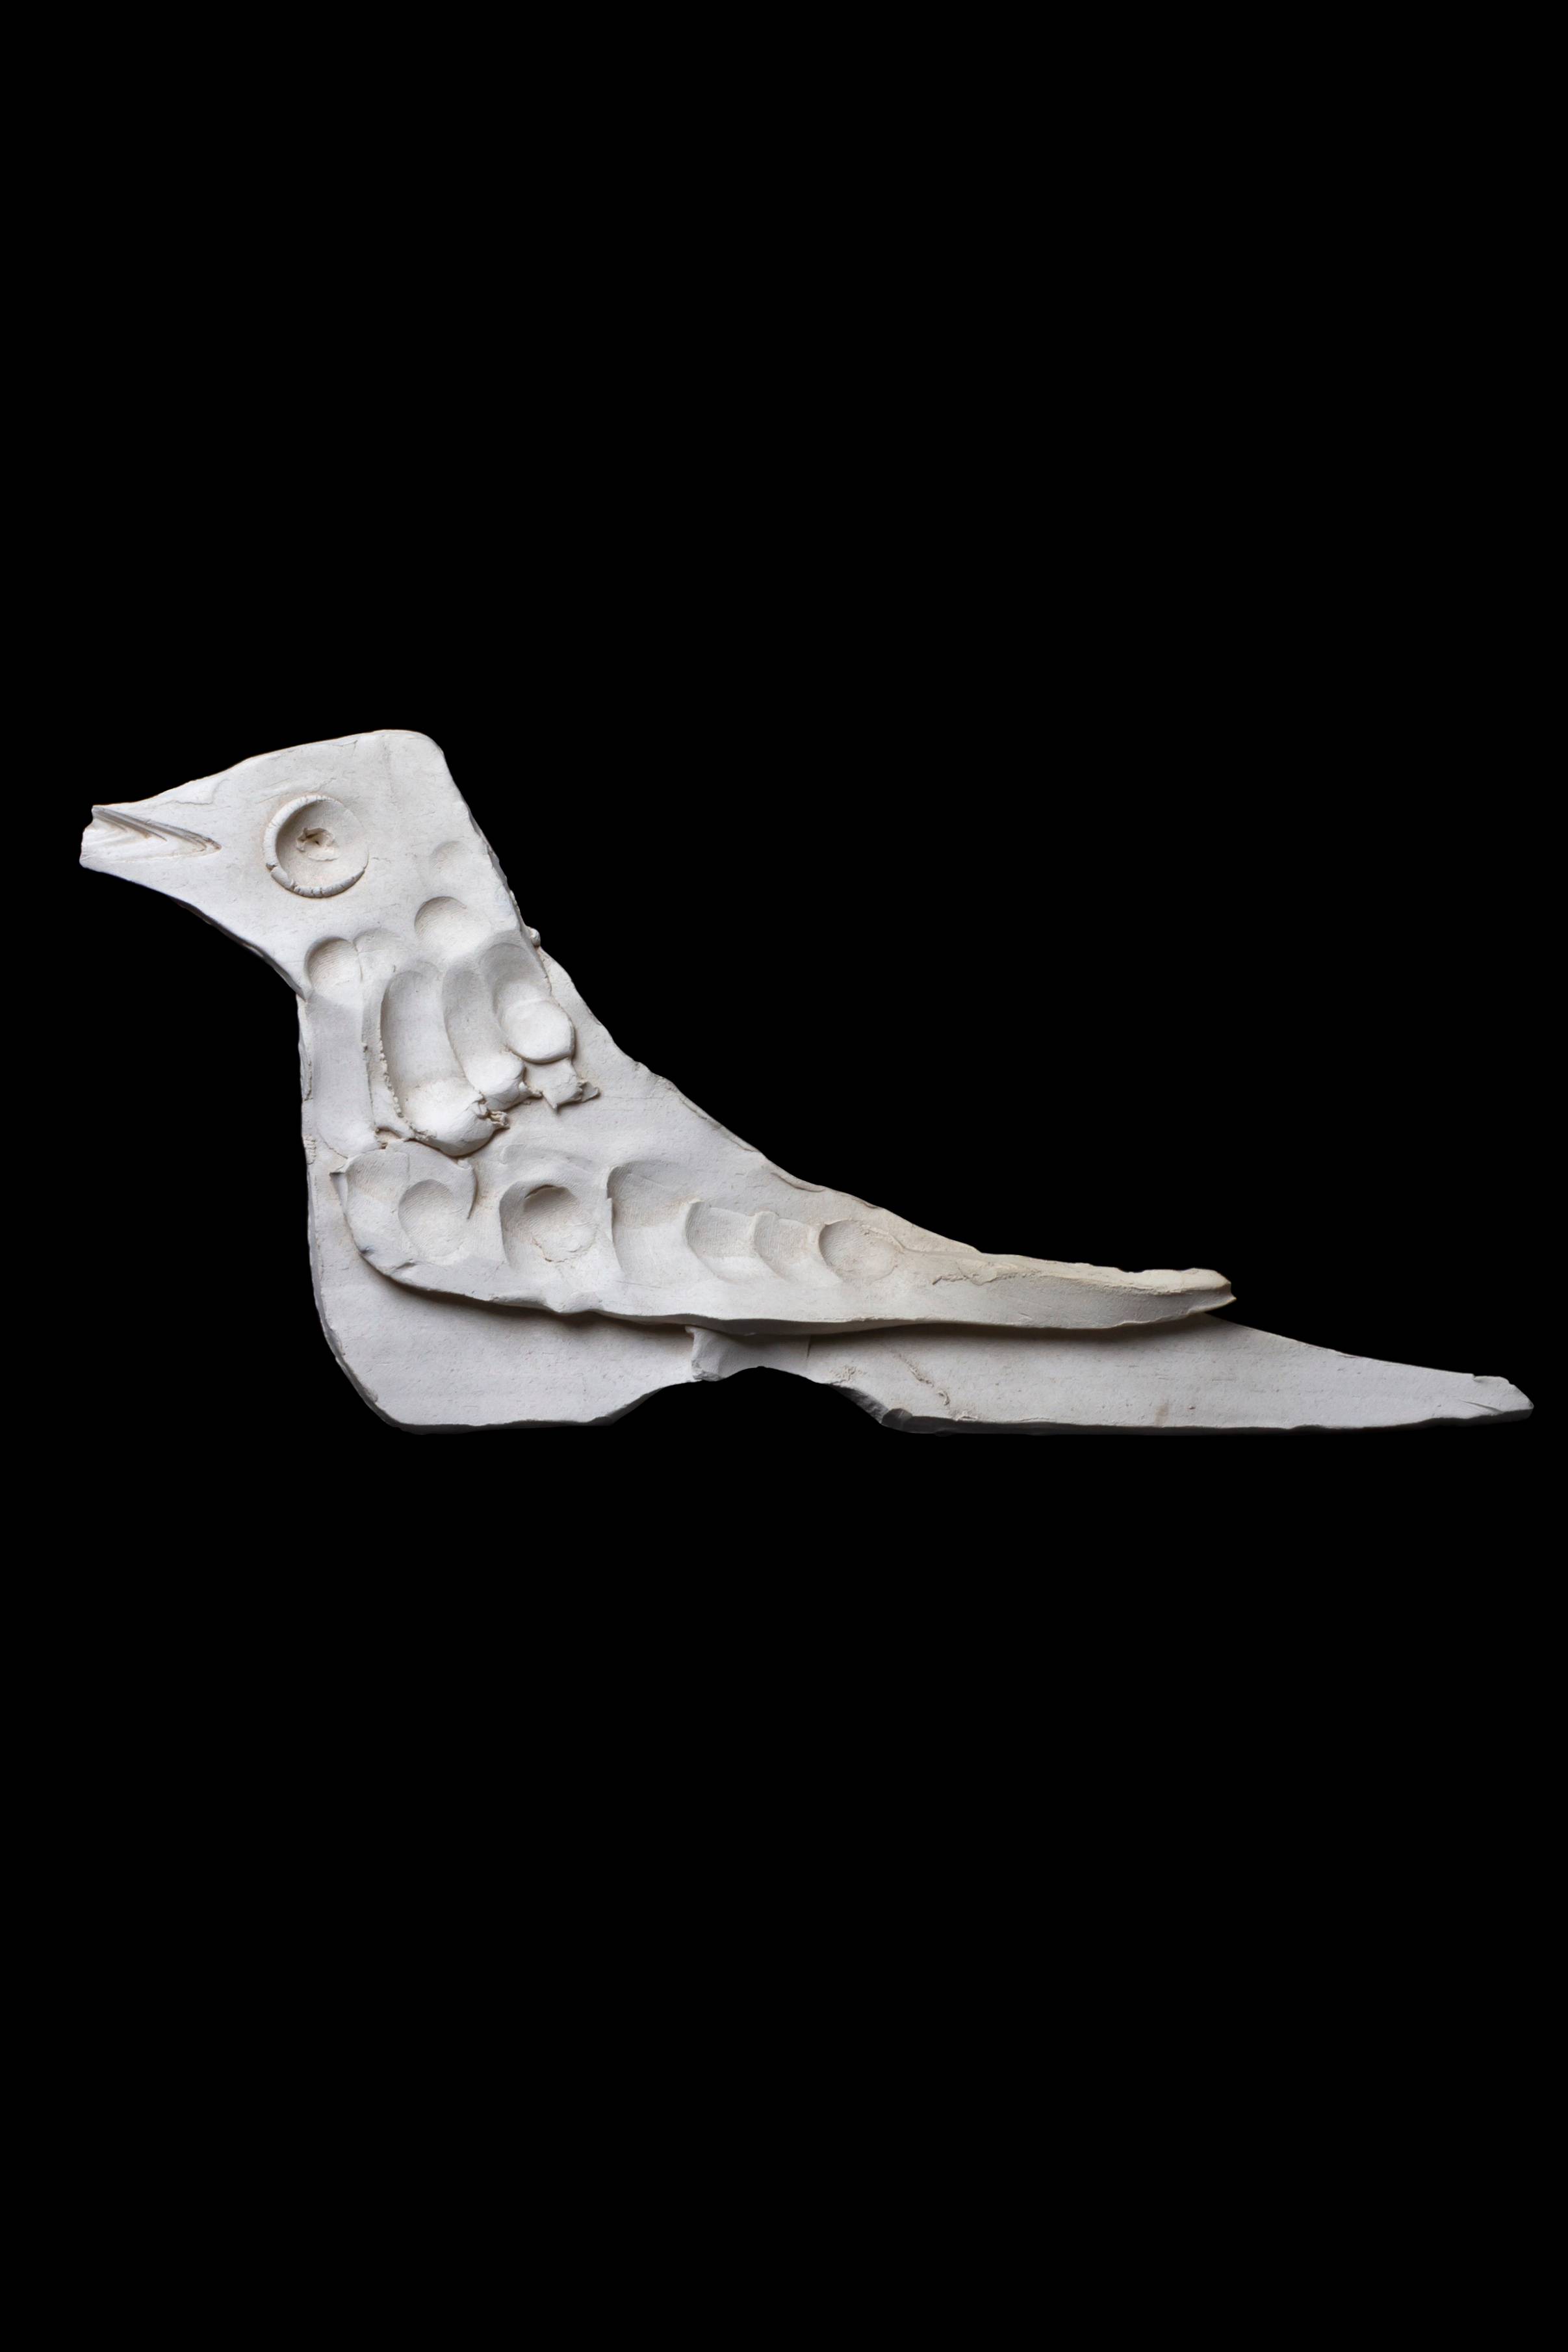 Pablo Picasso
Grand Oiseau
C.1957
Modelled and incised ceramic
19 x 38,5 x 2 cm
© Succession Picasso/DACS, London 2023. Courtesy Galerie Chenel